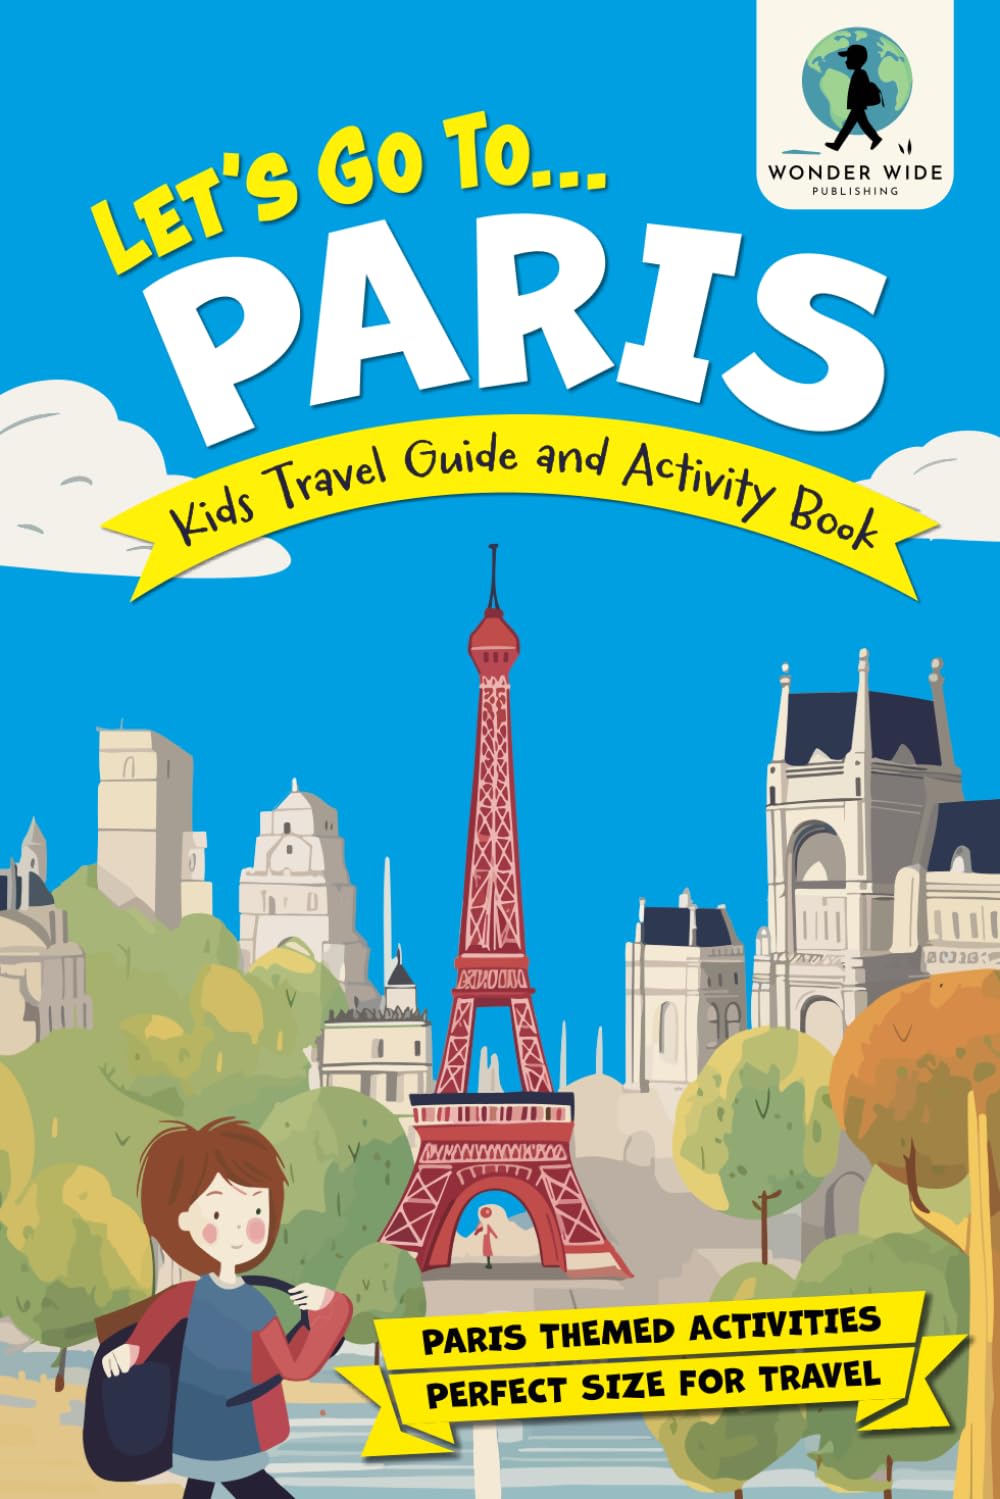 Let's Go To Paris: Kids Activity Book and Travel Guide — Feature Packed Paris Themed Activities and Fun Facts (Let's Go... Kids Travel Guides and Activity Books)